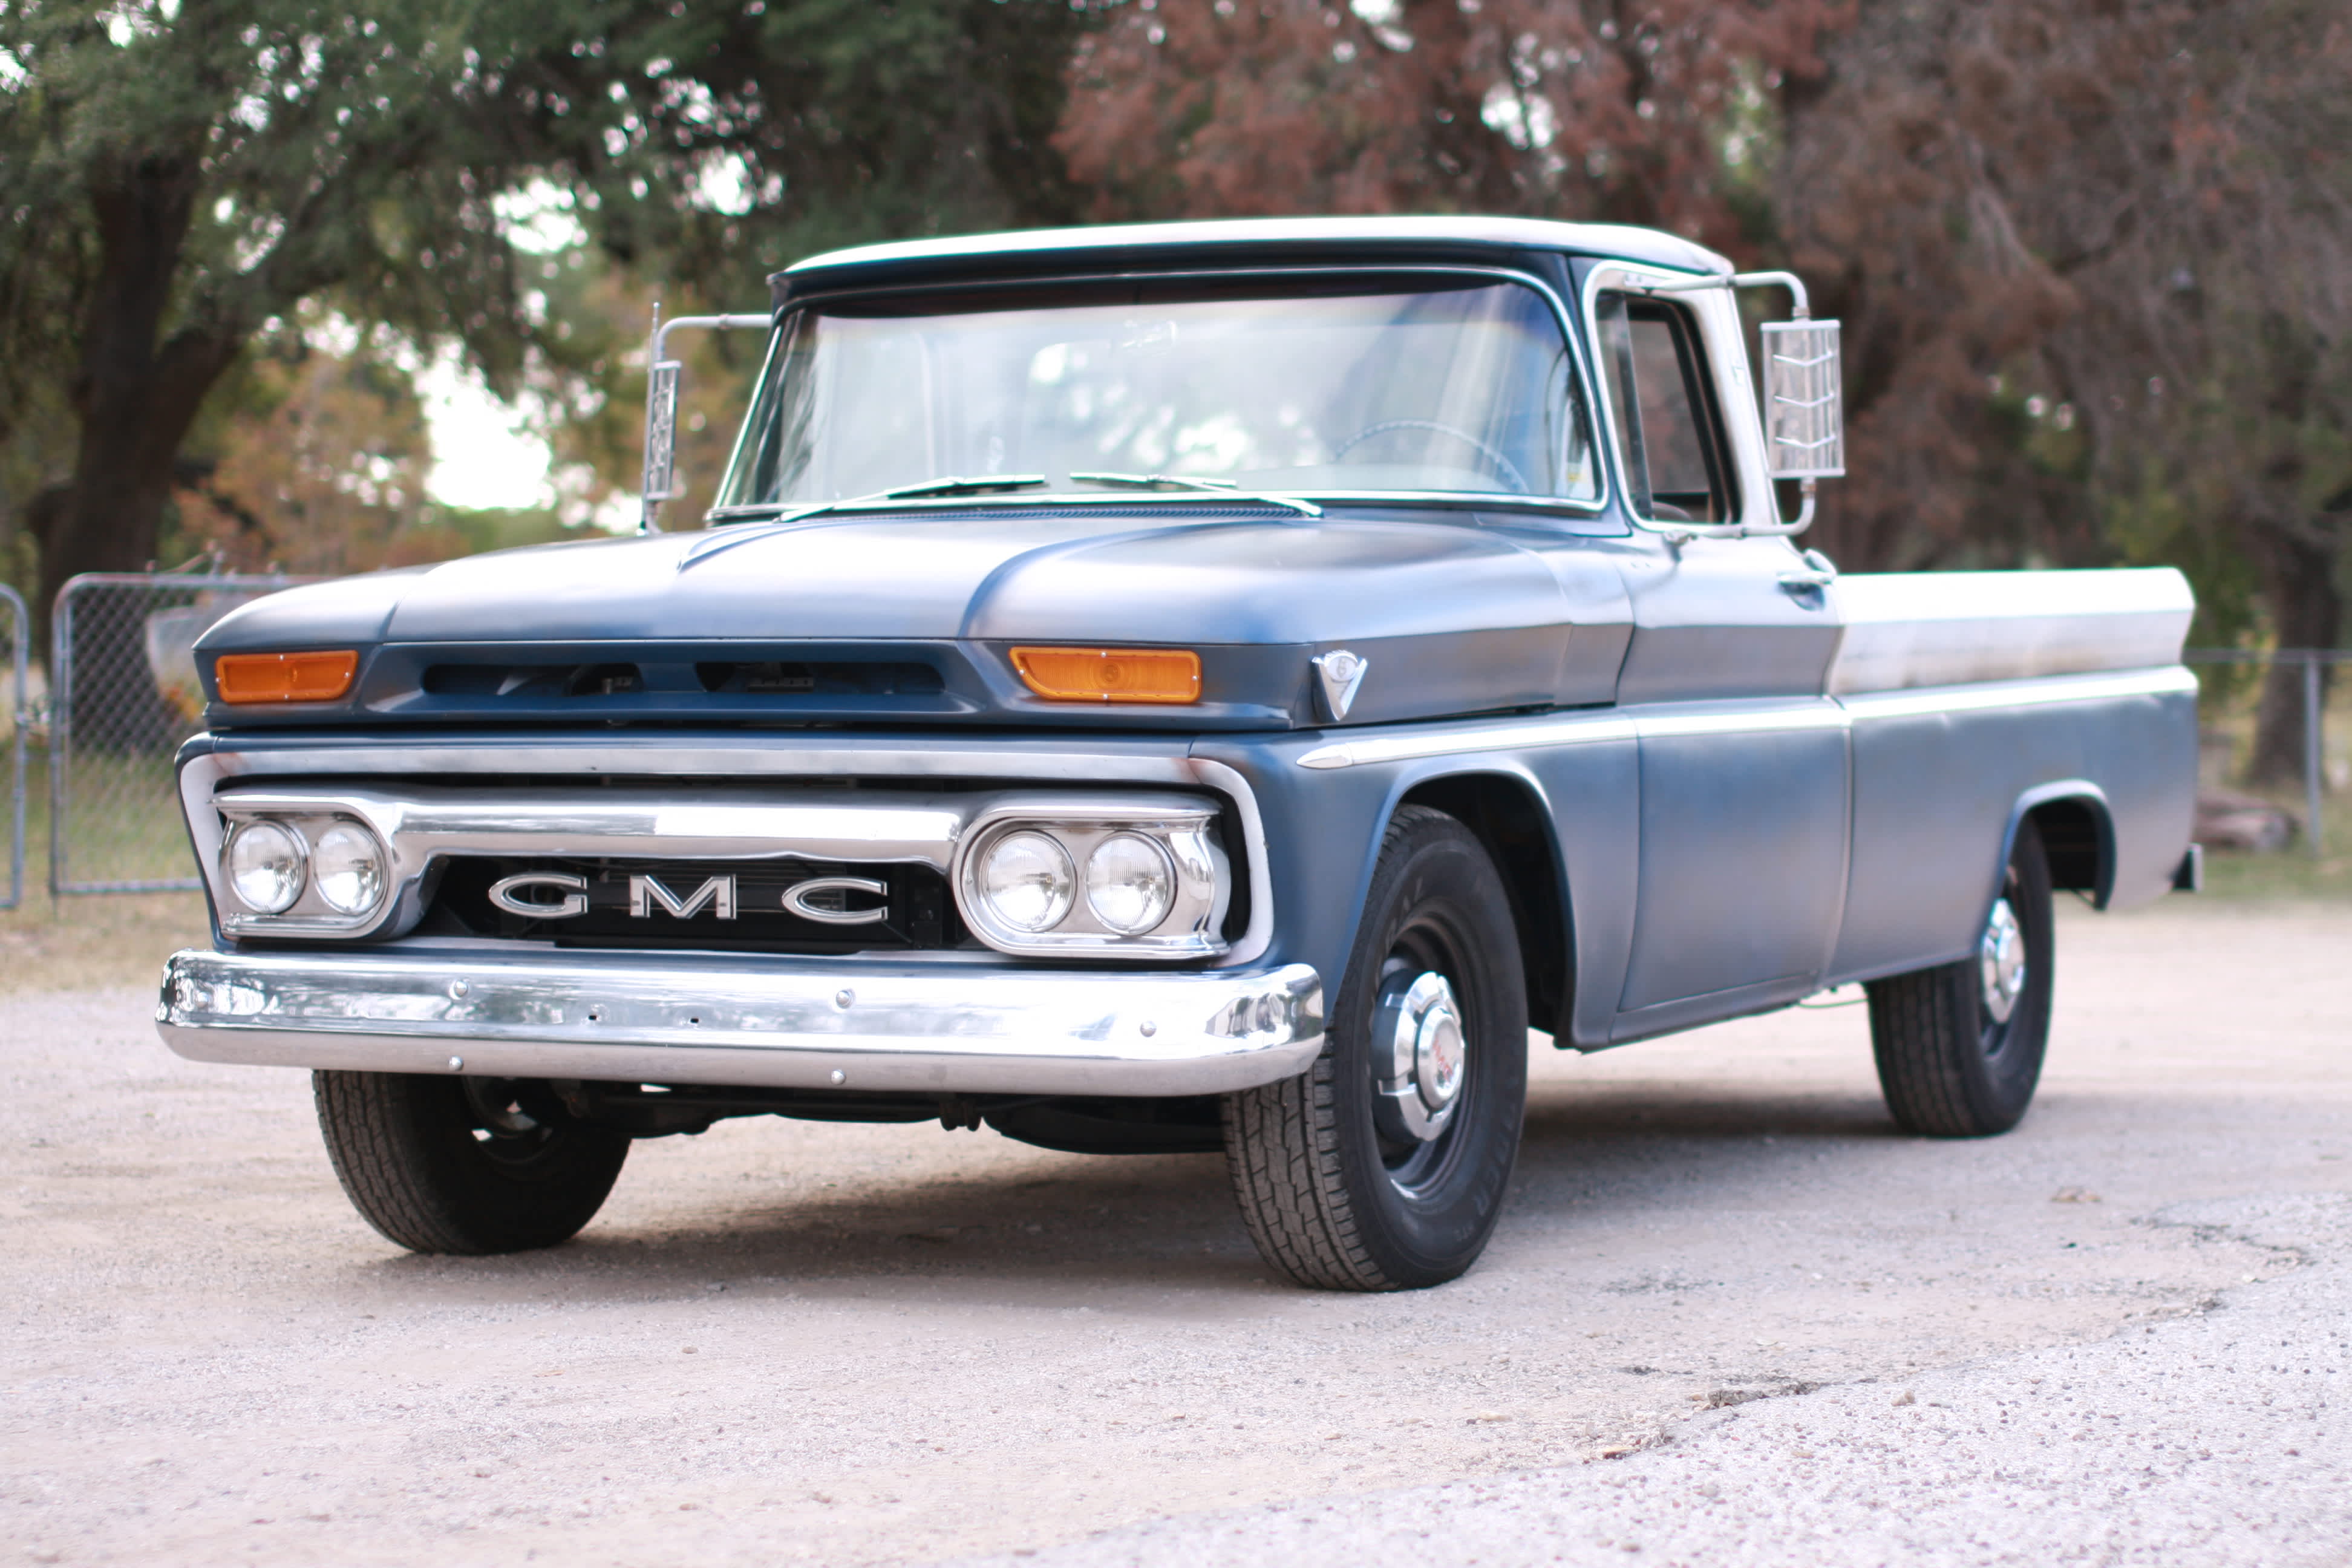 A 1963 GMC pickup truck converted to an EV by Moment Motor Co.